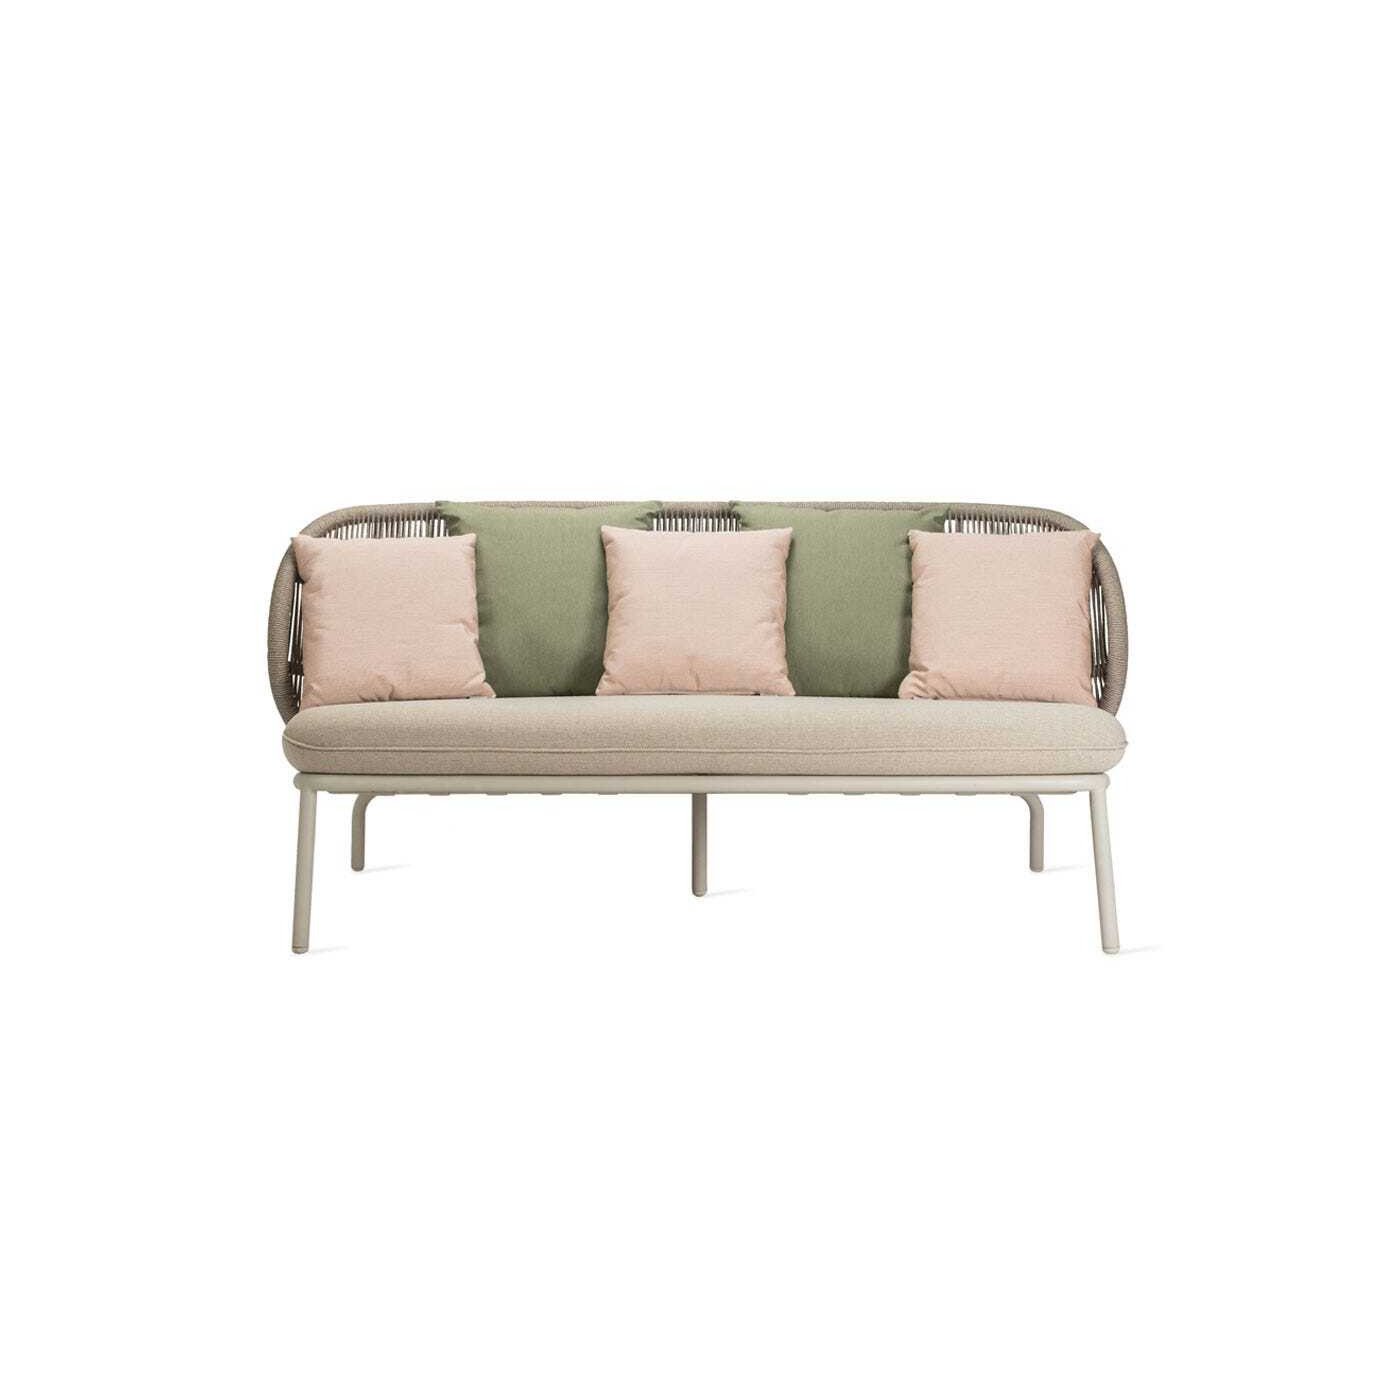 Vincent Sheppard Kodo Outdoor Lounge Sofa Dune White Olive and Blush Cushions - image 1